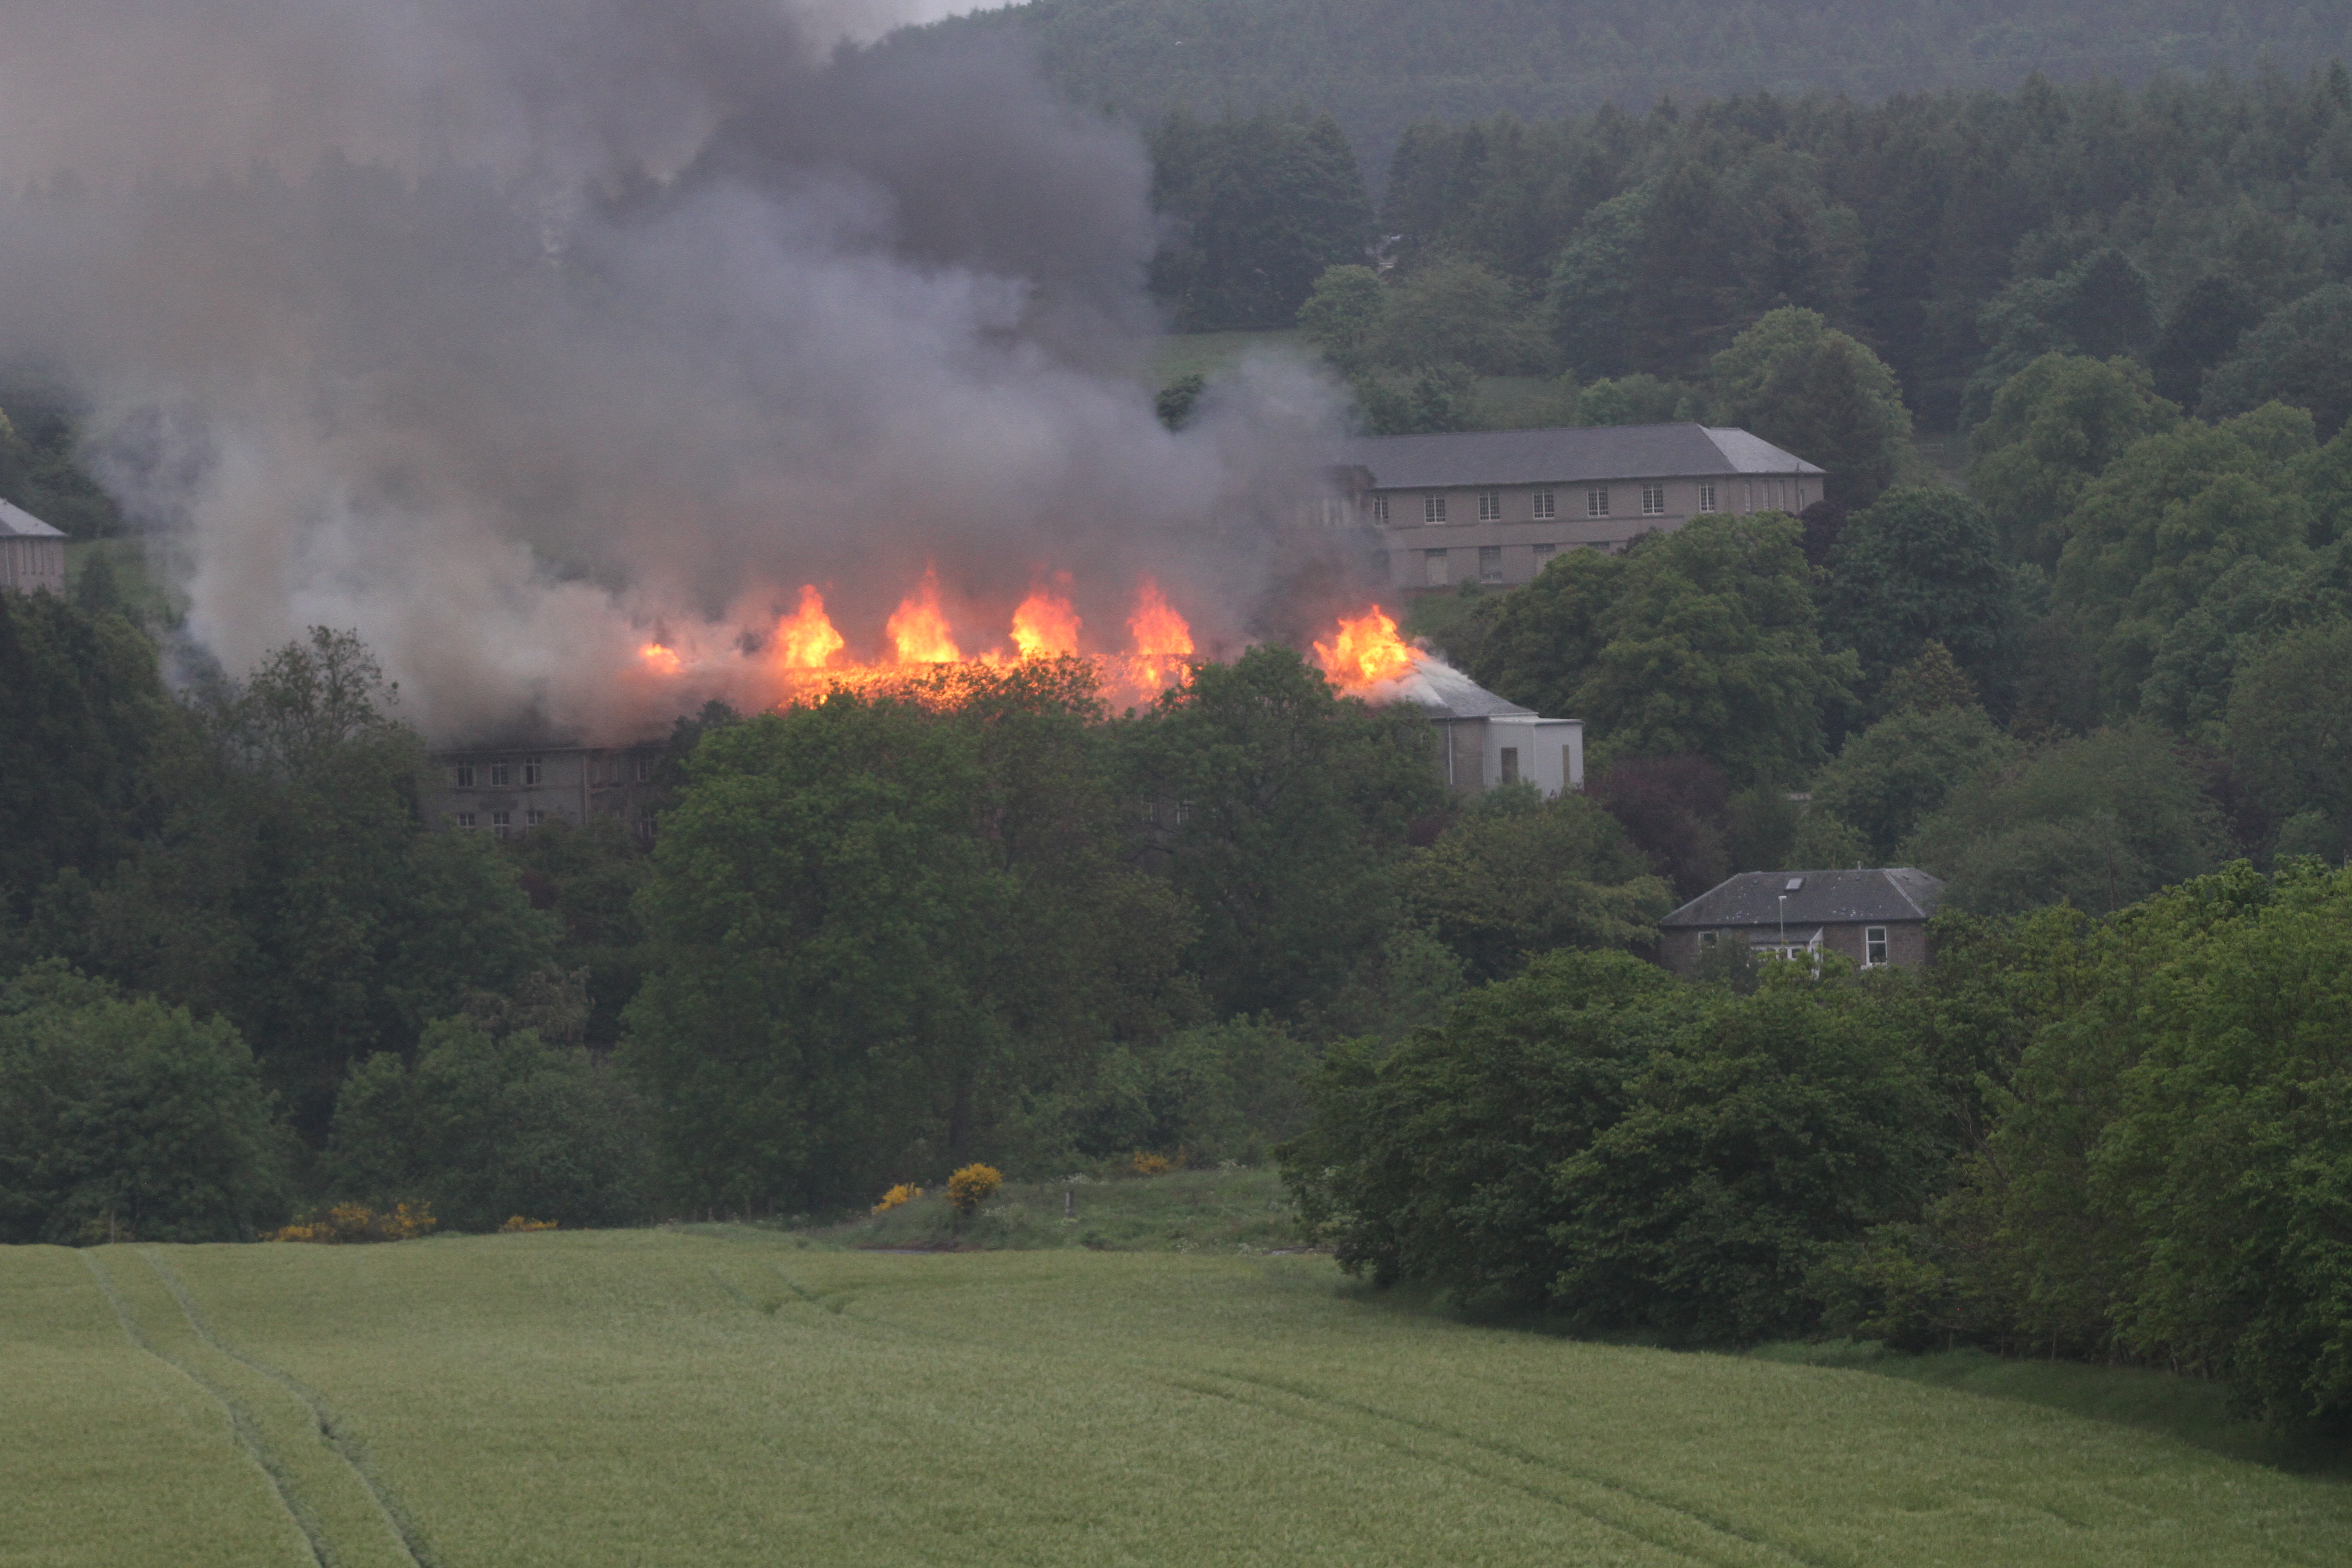 The roof of Strathmartine Hospital was on fire.